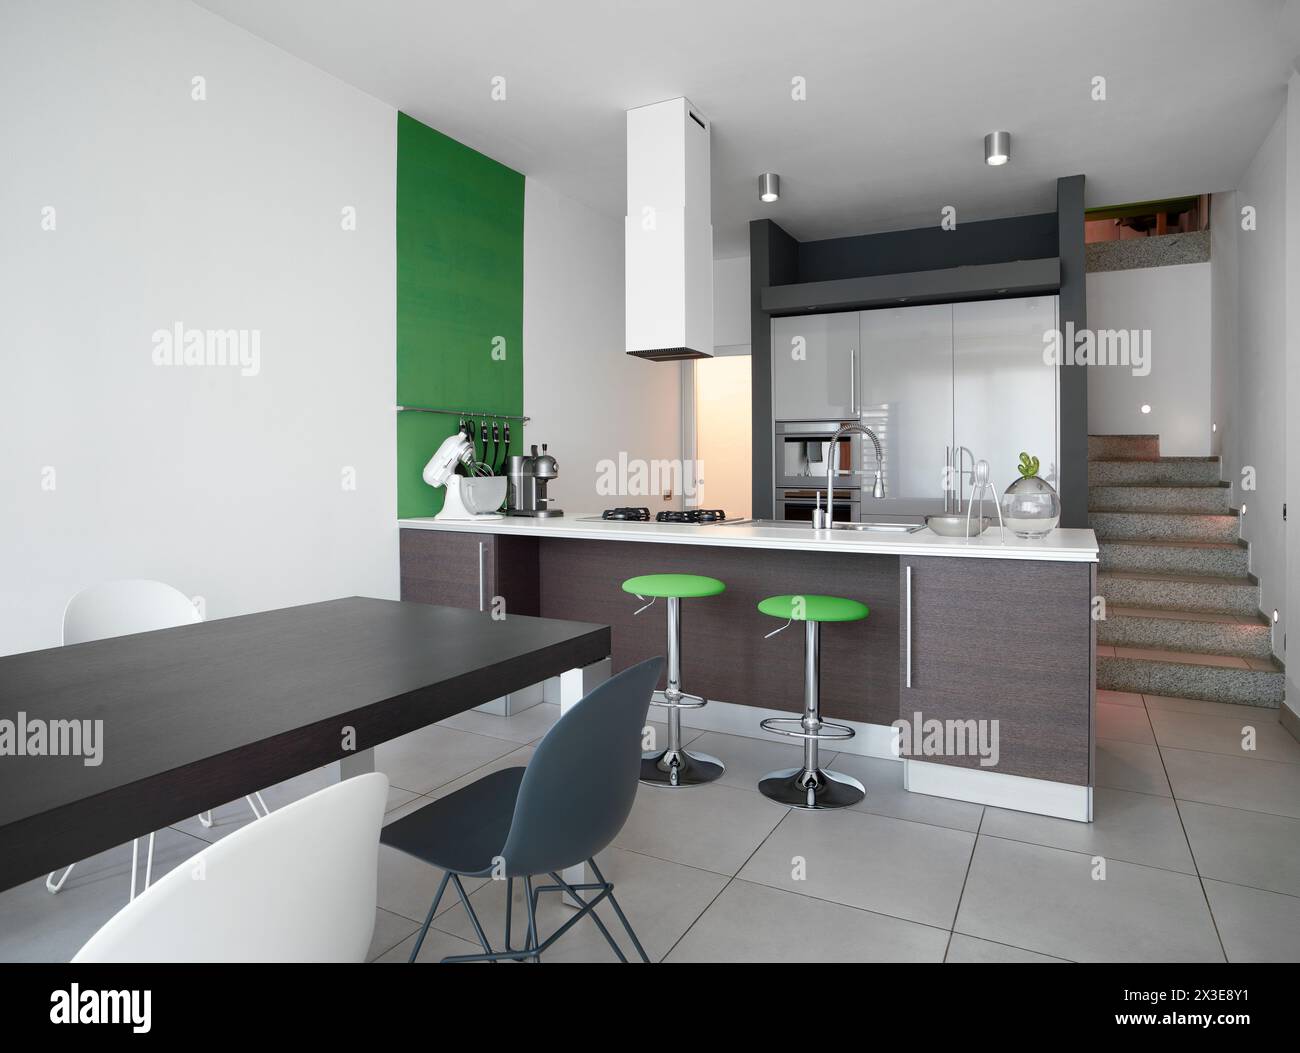 Interior view of a modern kitchen in the foregorund Stock Photo